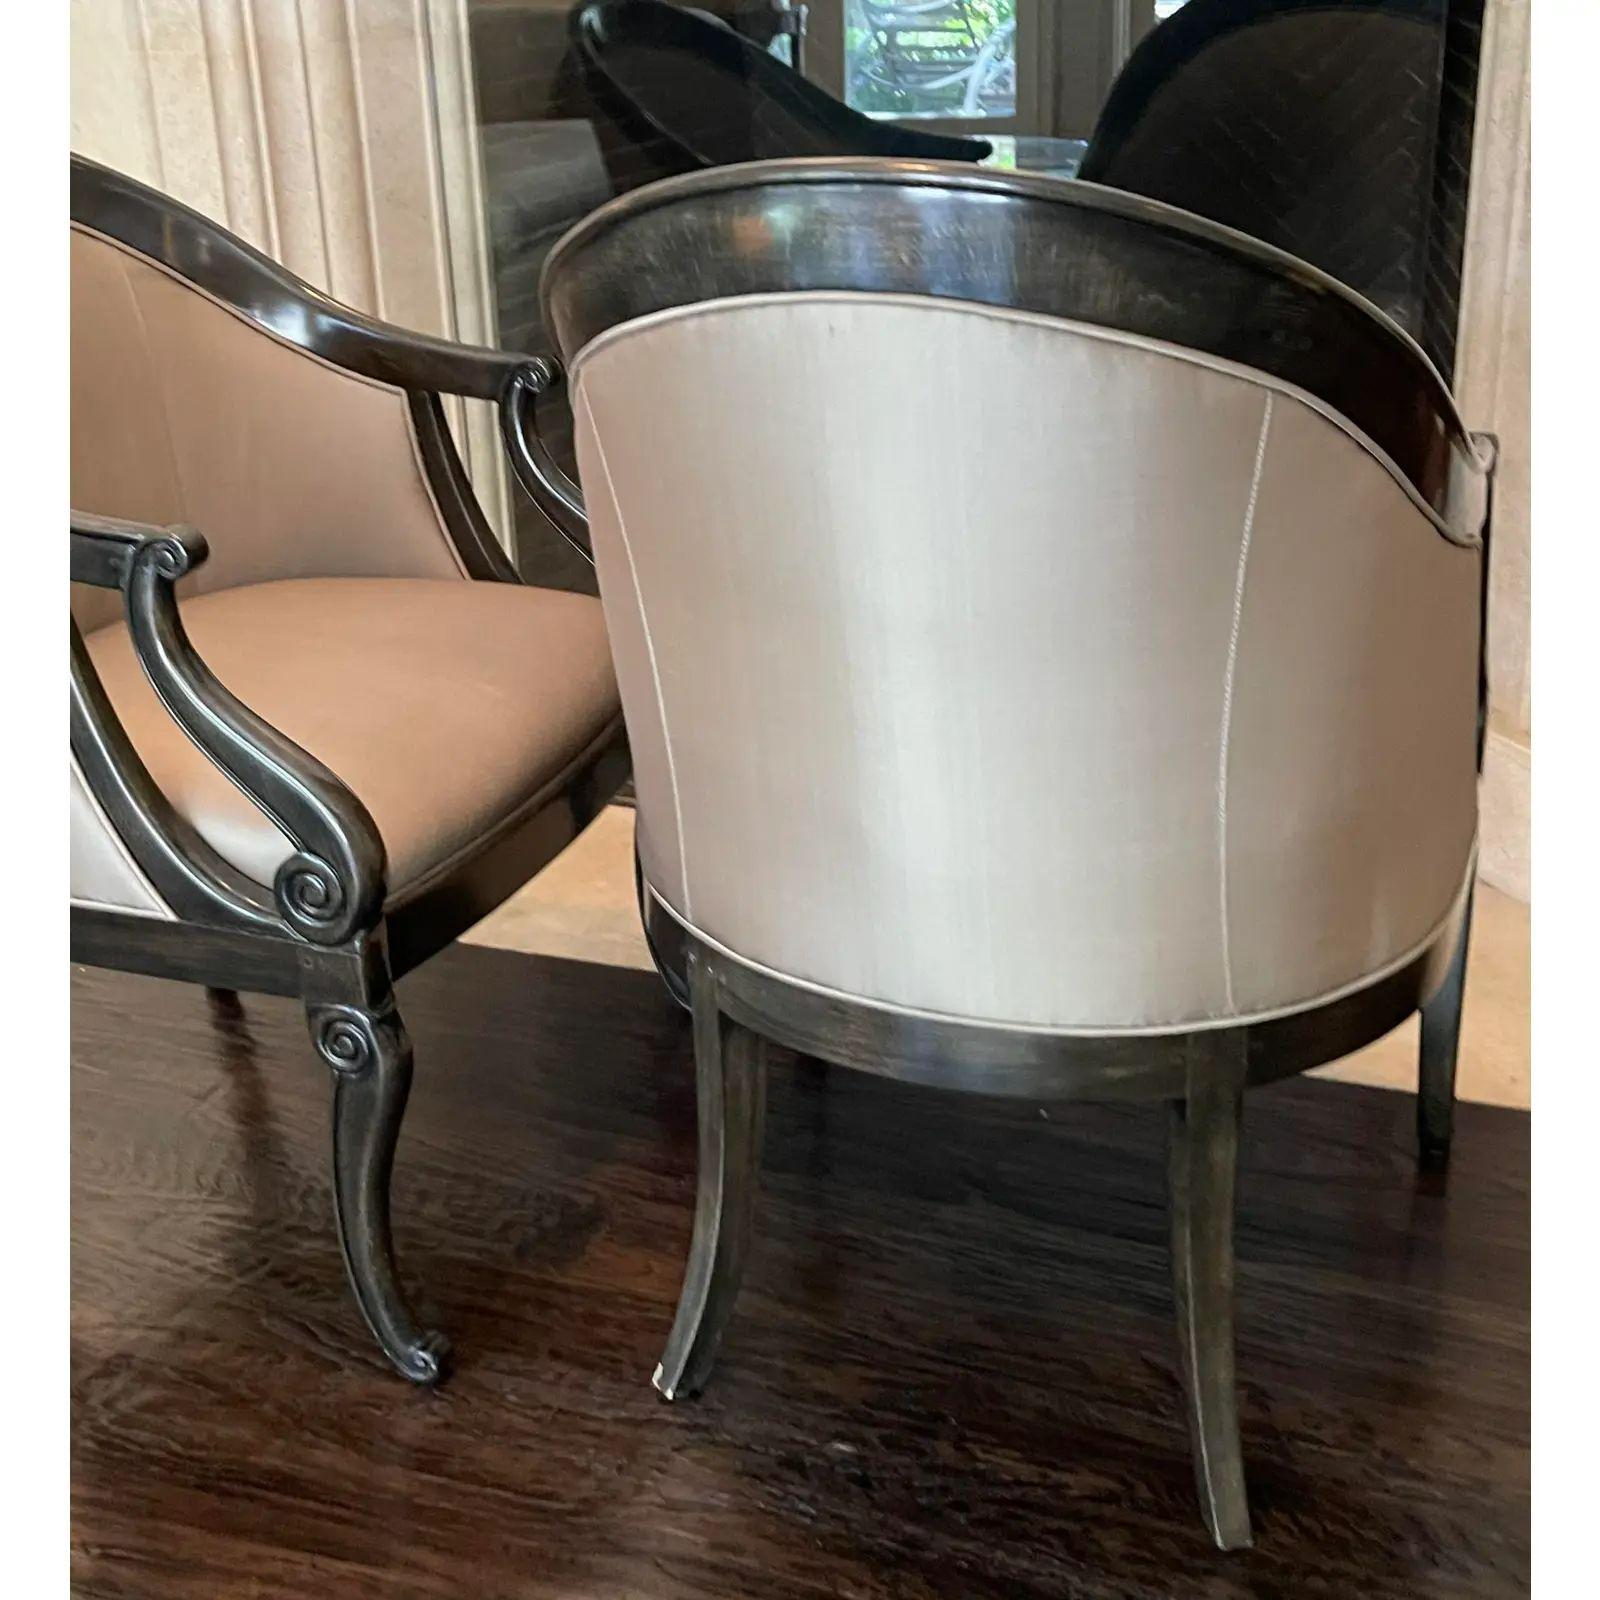 Pair of Art Deco style Sally Sirkin Lewis for J. Robert Scott Club chairs. Each with a barrel form in carved ebony with beige silk upholstery.

Additional information: 
Materials: Ebony, Silk
Color: Black
Brand: William Switzer
Designer: